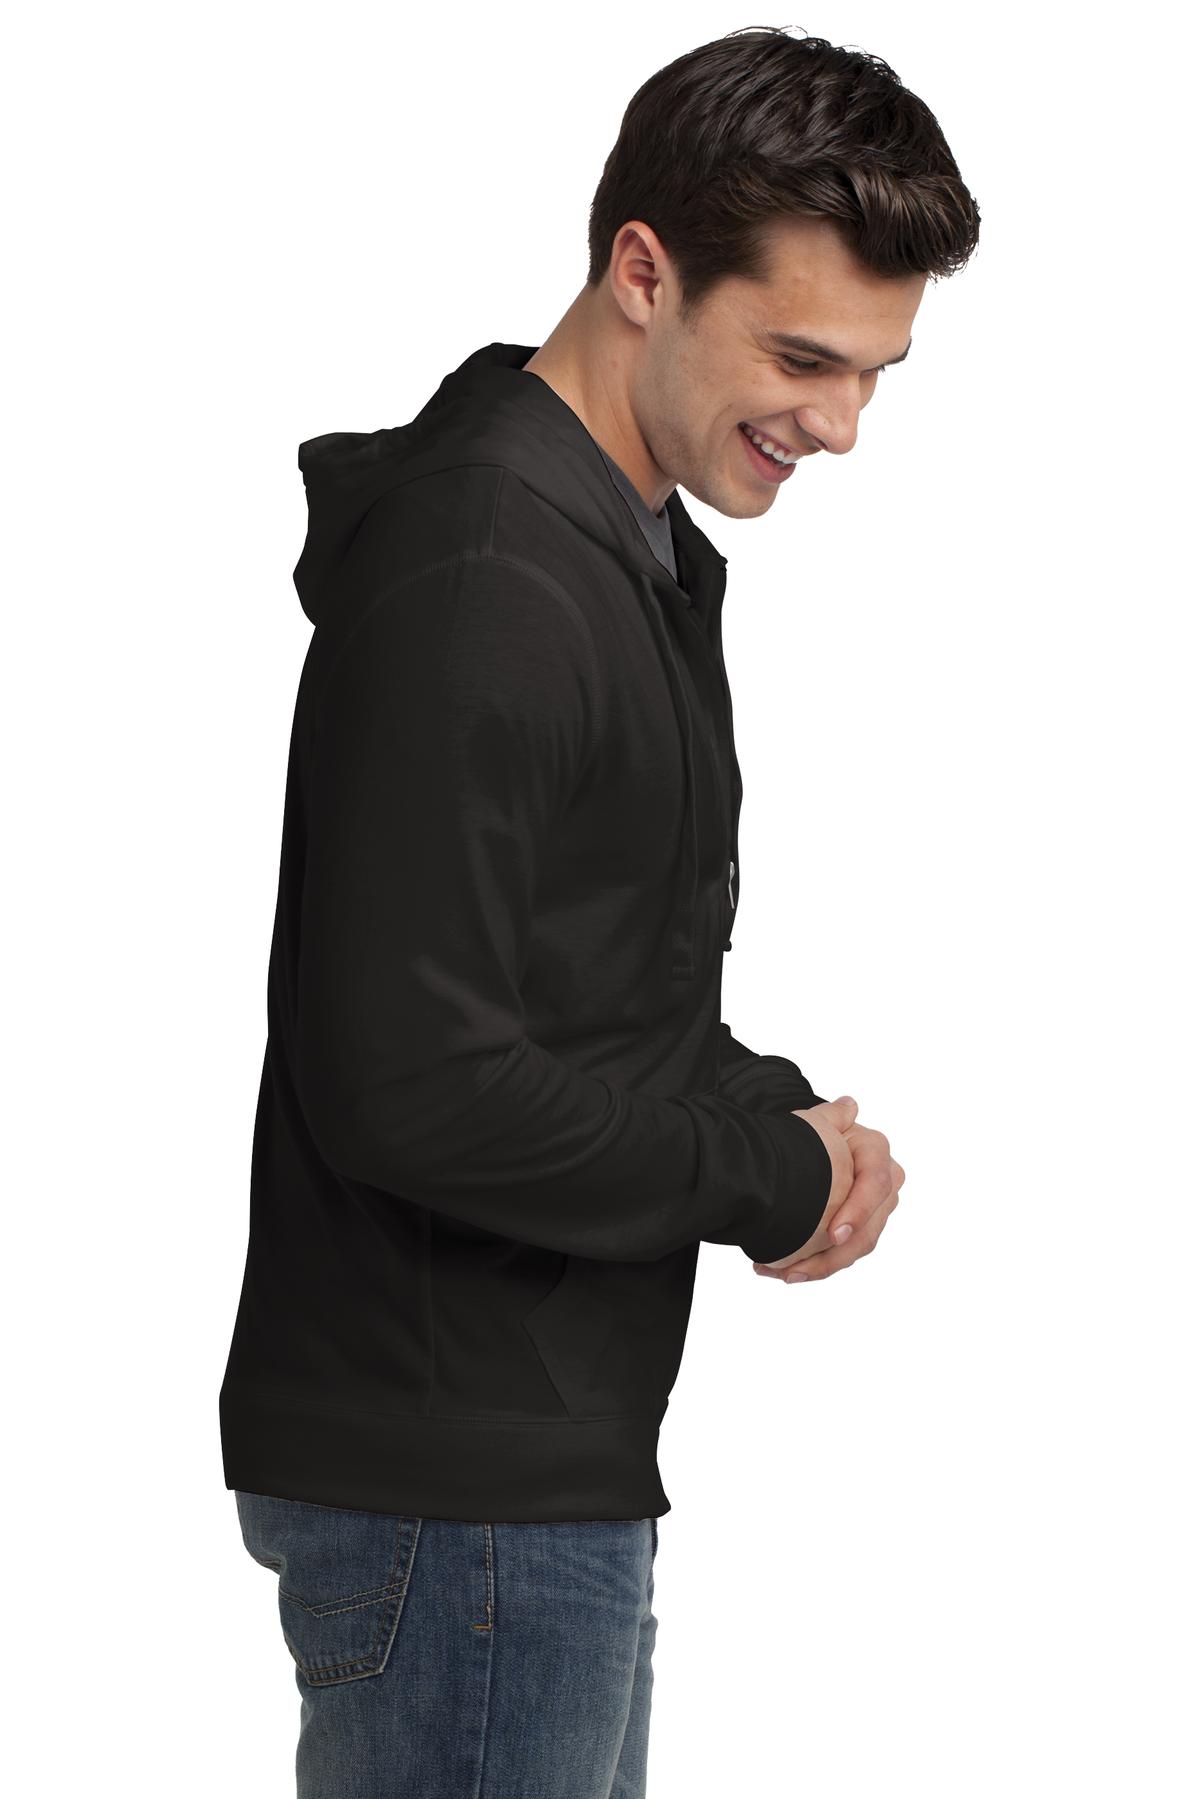 District Young Mens Jersey Full Zip Hoodie-L (Black) - image 3 of 6